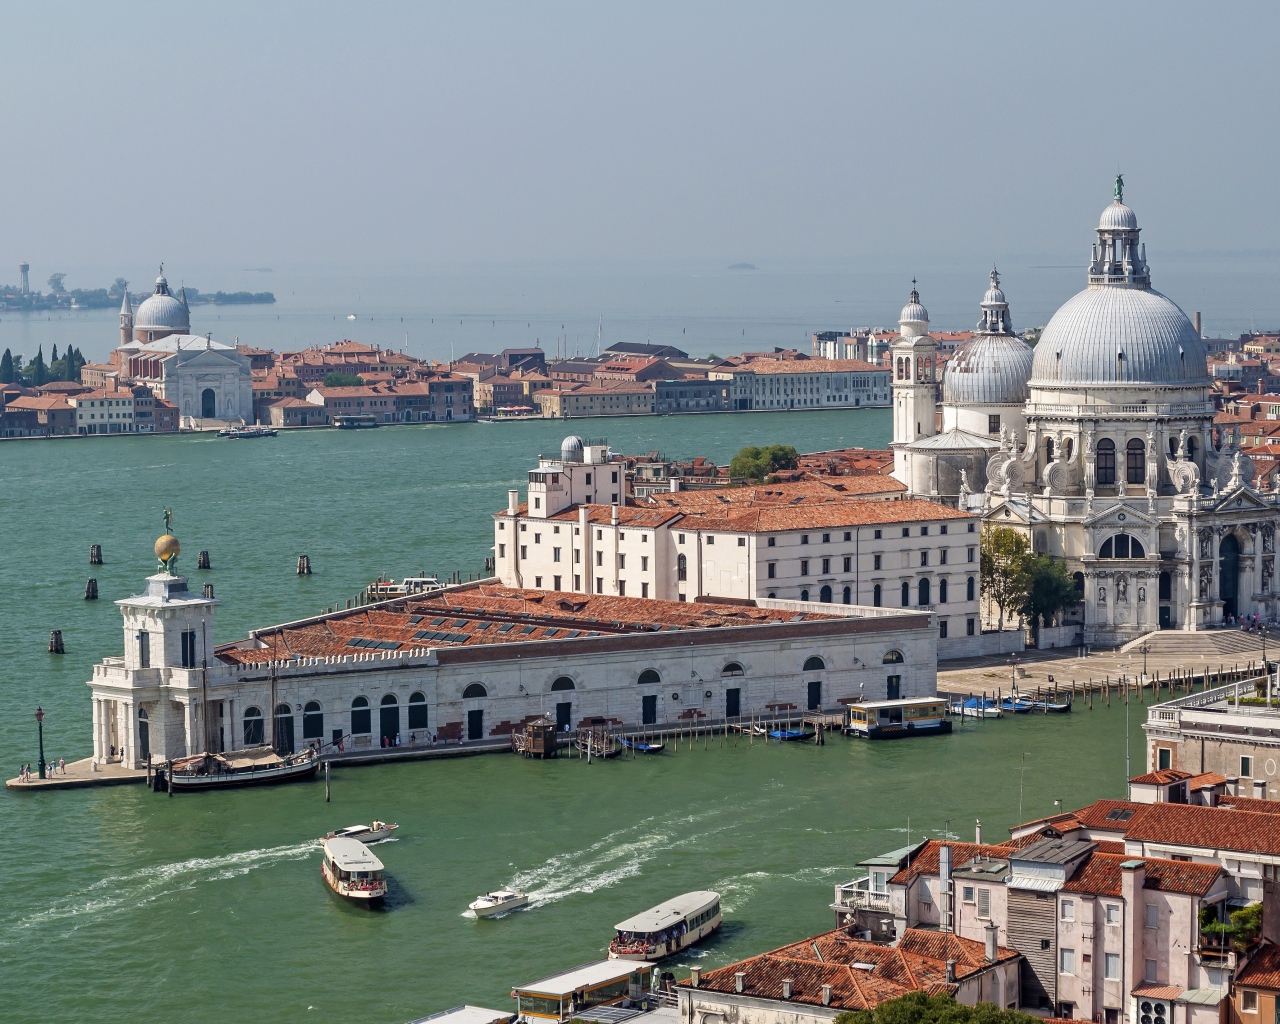 View of the Cathedral of Santa Maria della Salute on the Grand Canal, Venice. Italy